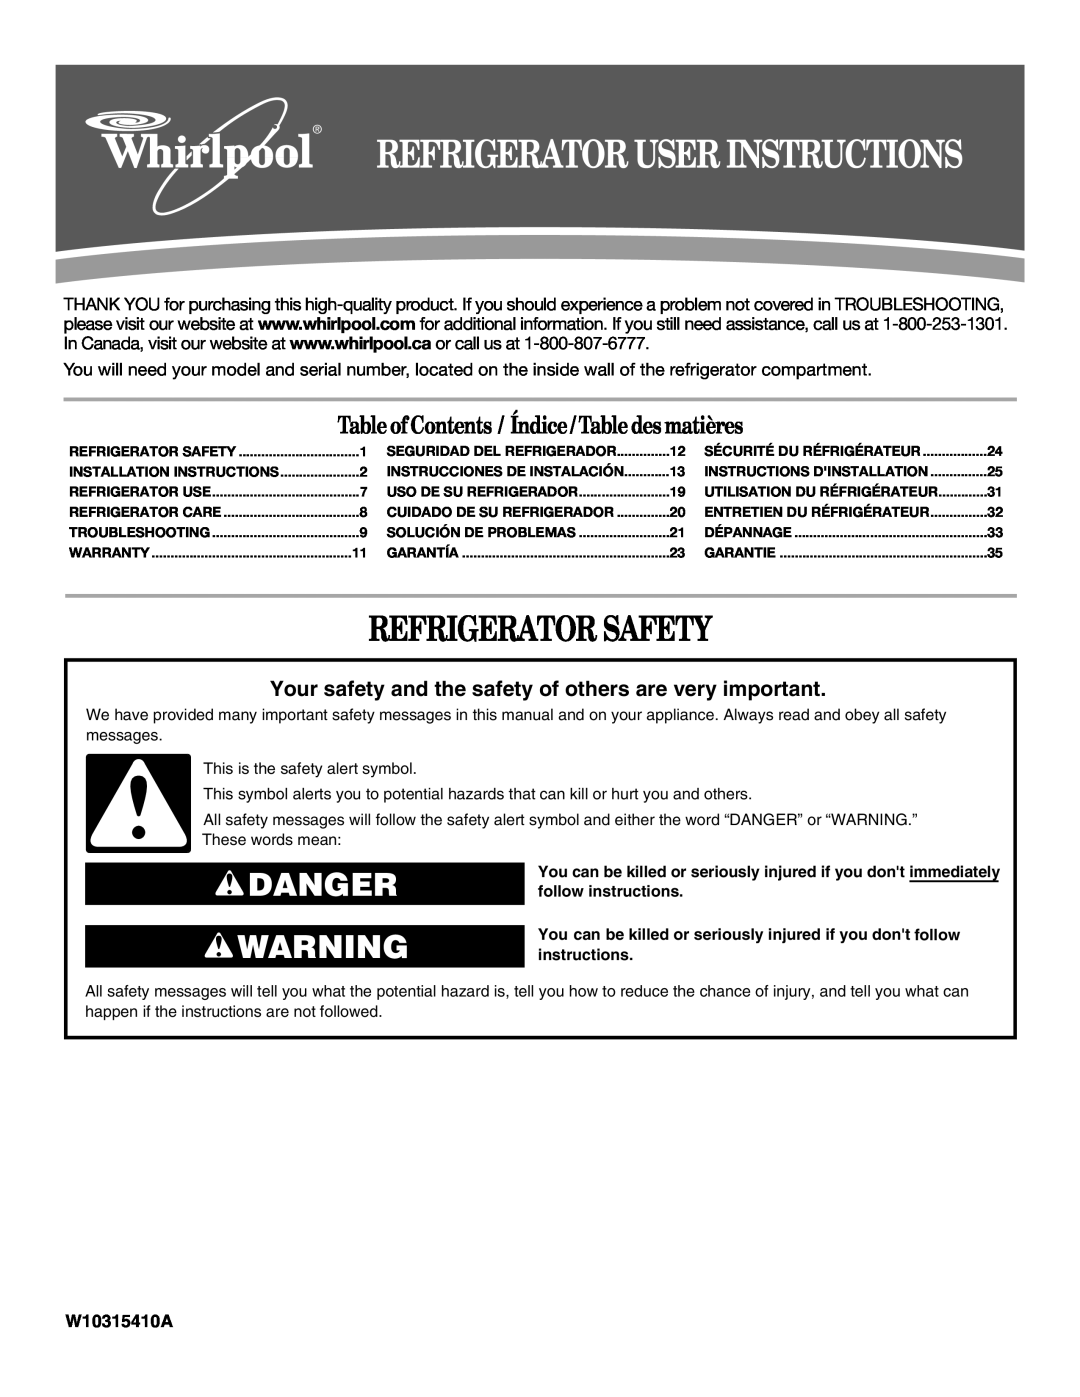 Whirlpool W10315410A installation instructions Refrigerator Safety, Danger, Table ofContents / Índice / Table des matières 